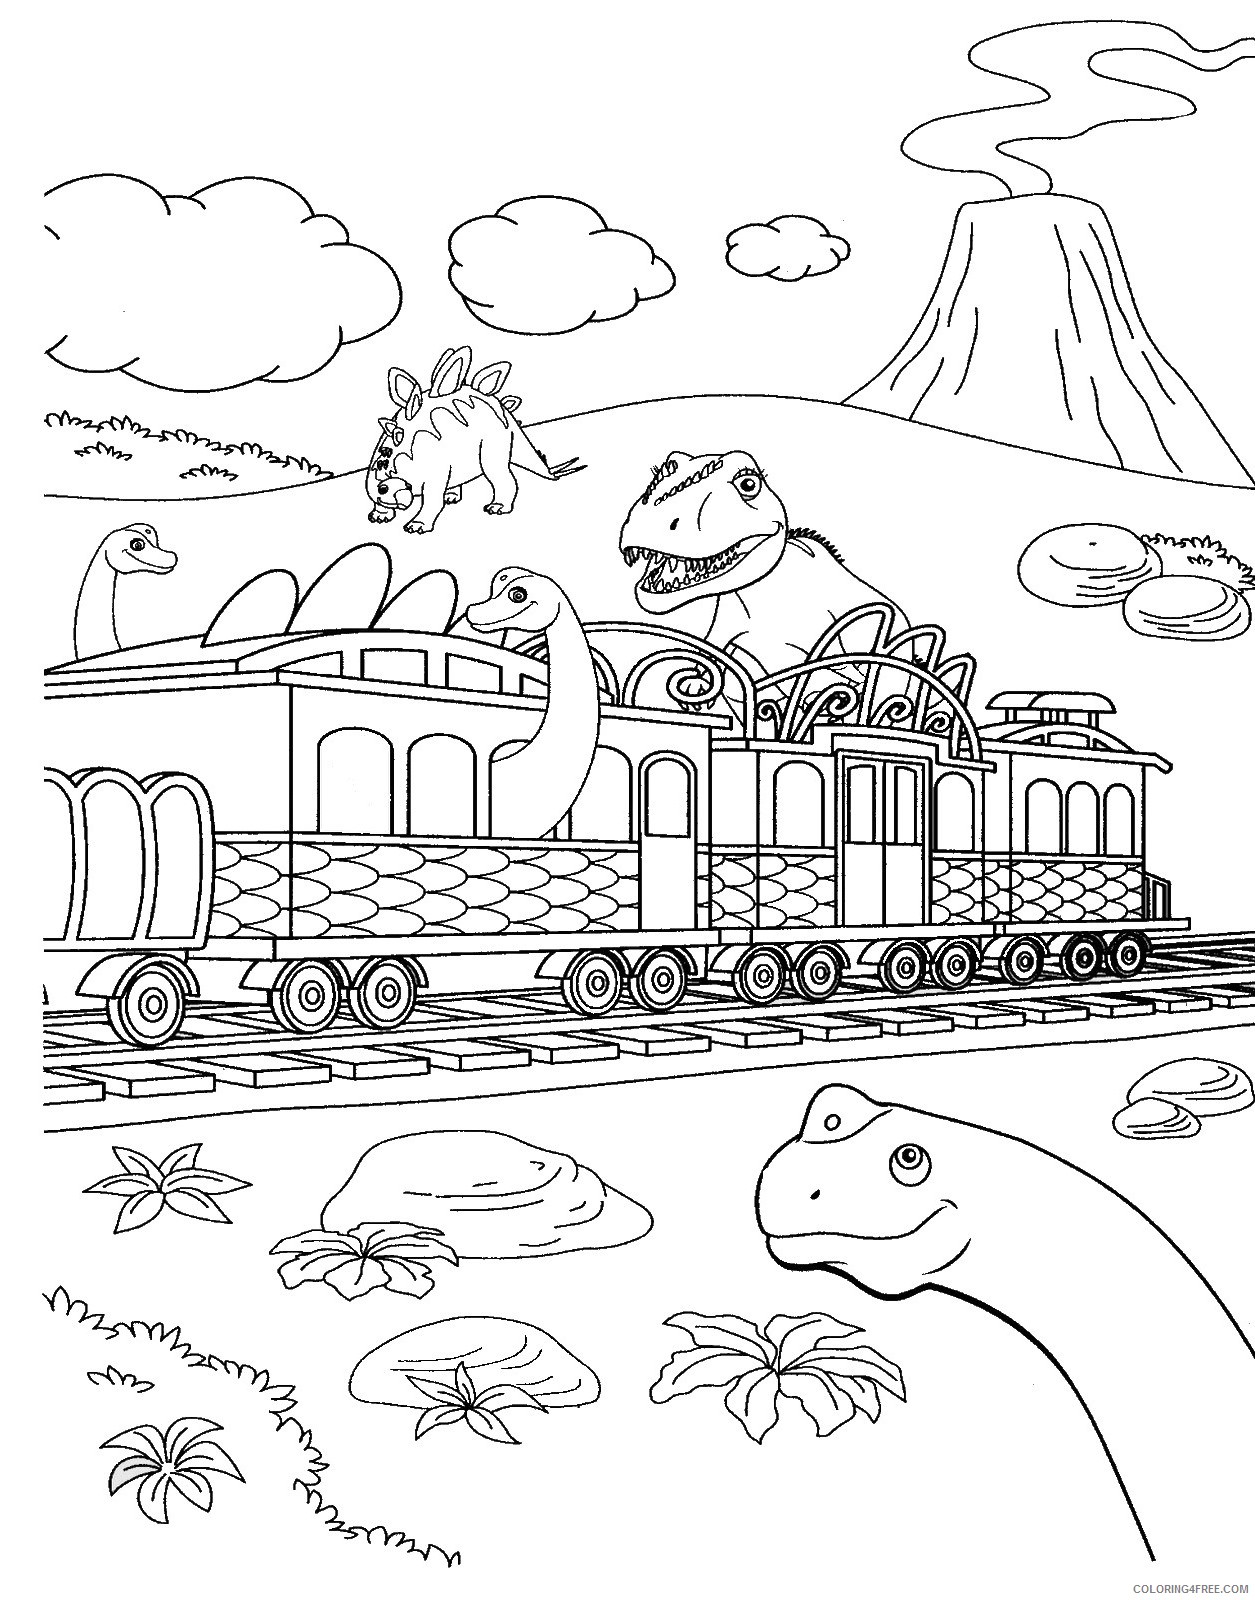 train coloring pages age of dinosaurs Coloring4free